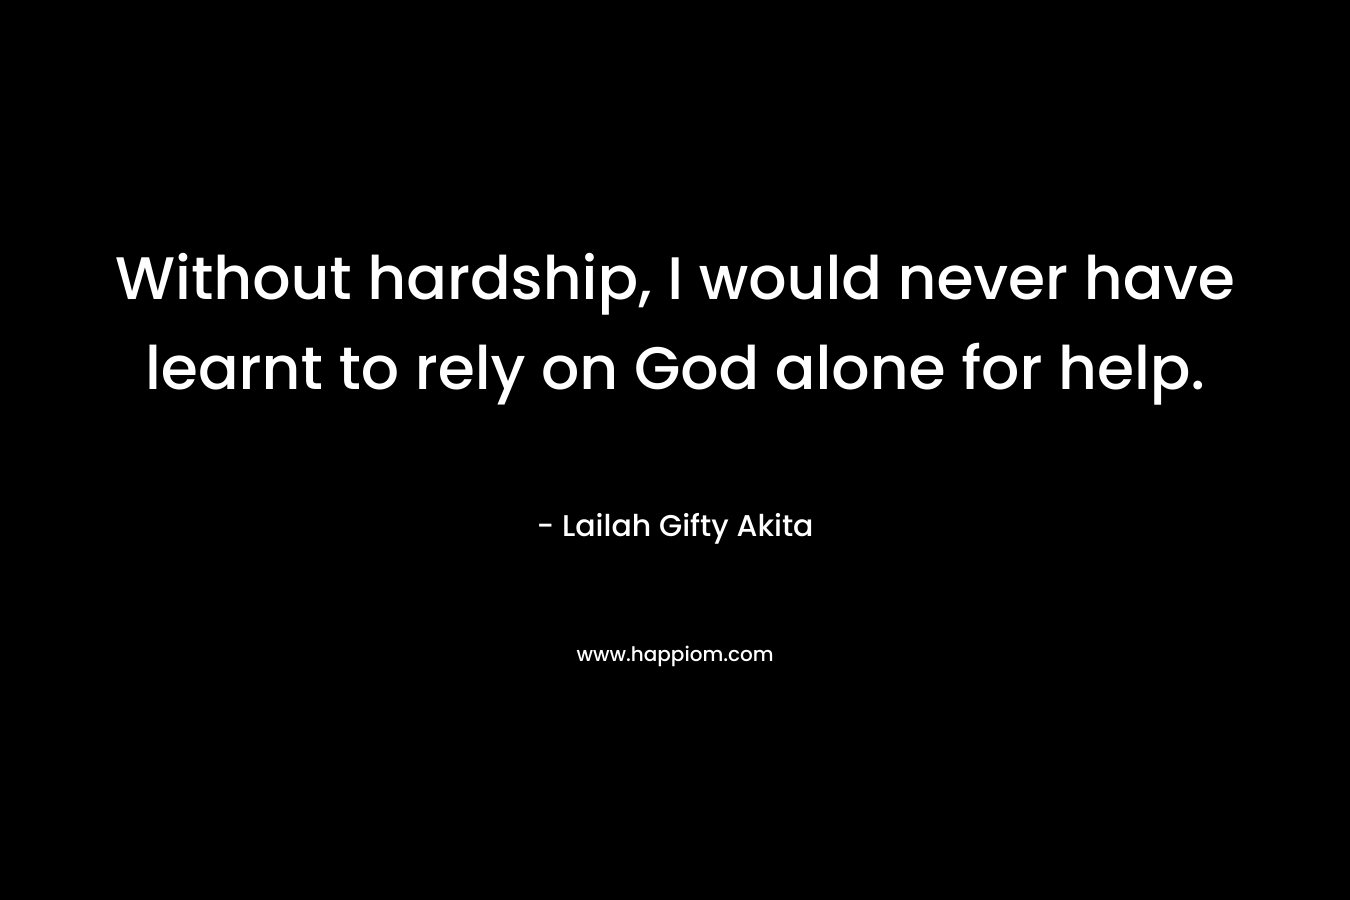 Without hardship, I would never have learnt to rely on God alone for help.